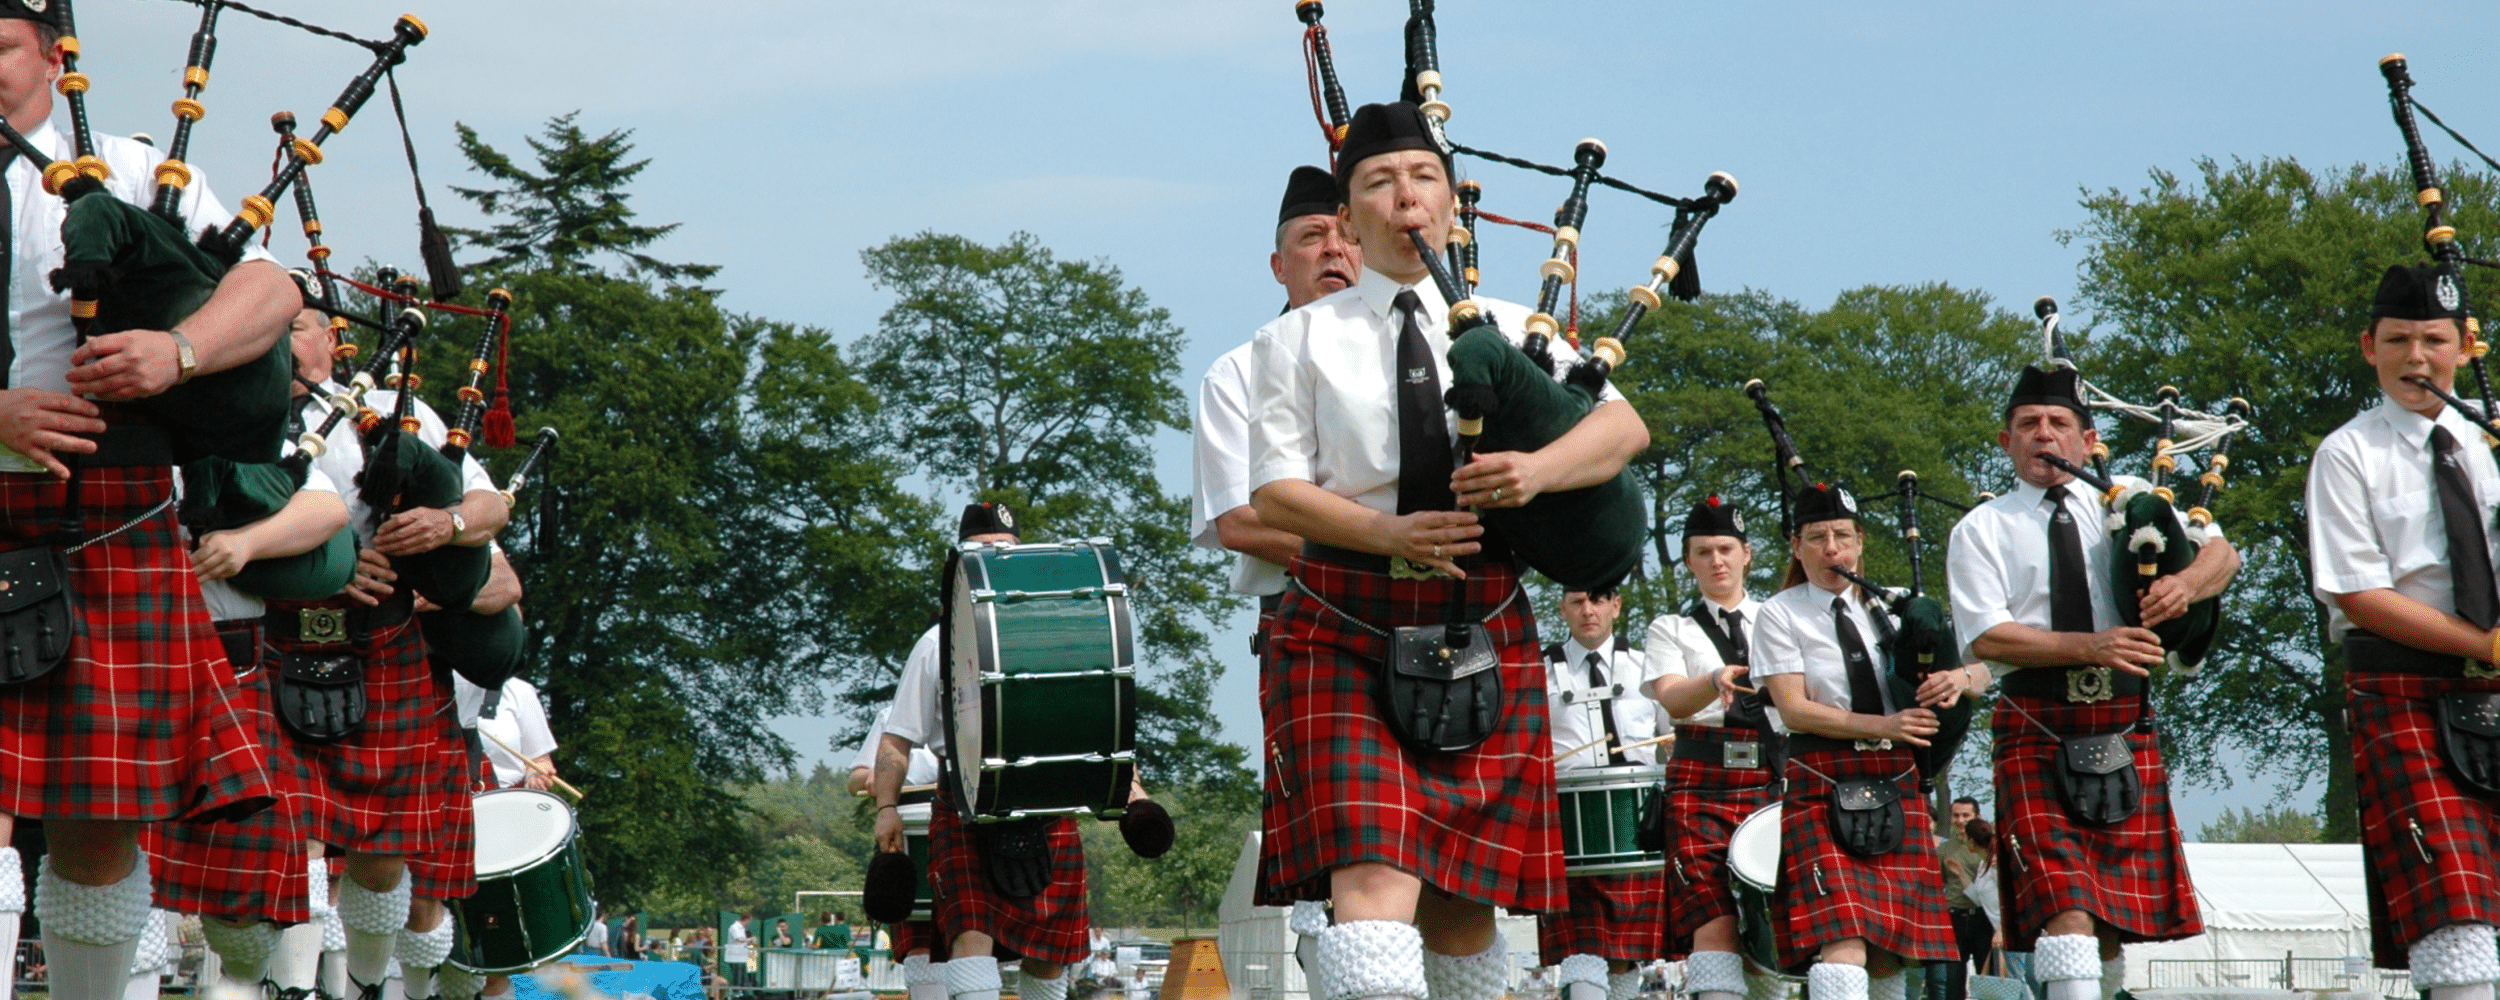 scottish bagpipers in their traditional attire performing at a music festival